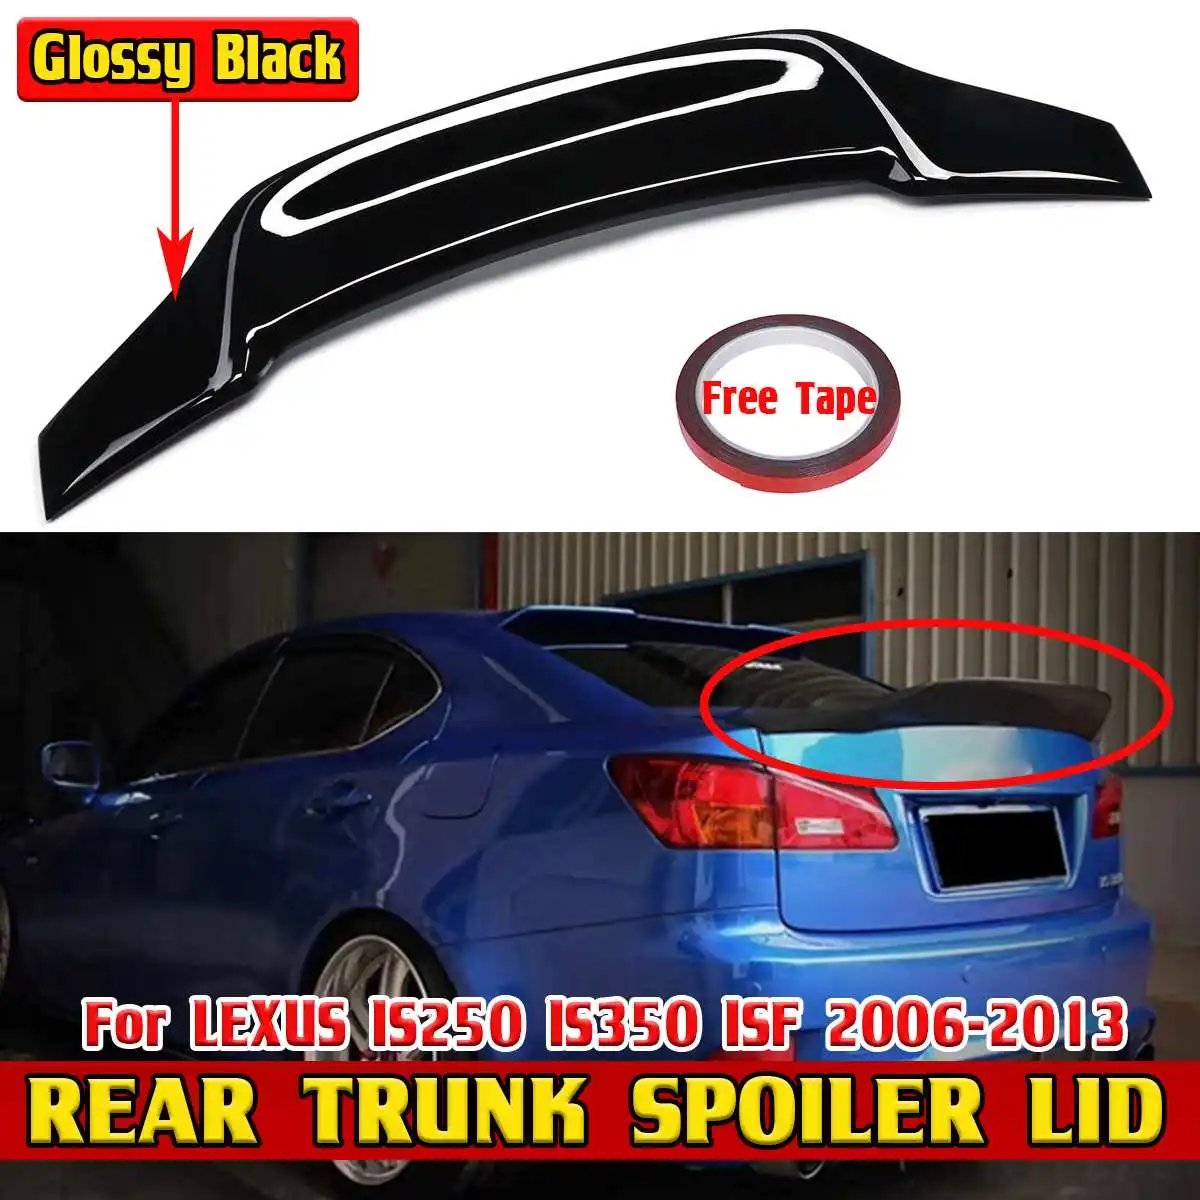 

High Quality IS250 RT Style Car Rear Trunk Spoiler Lip Boot Wing Lip For LEXUS IS250 IS350 ISF 2006-2013 Rear Roof Lip Spoiler